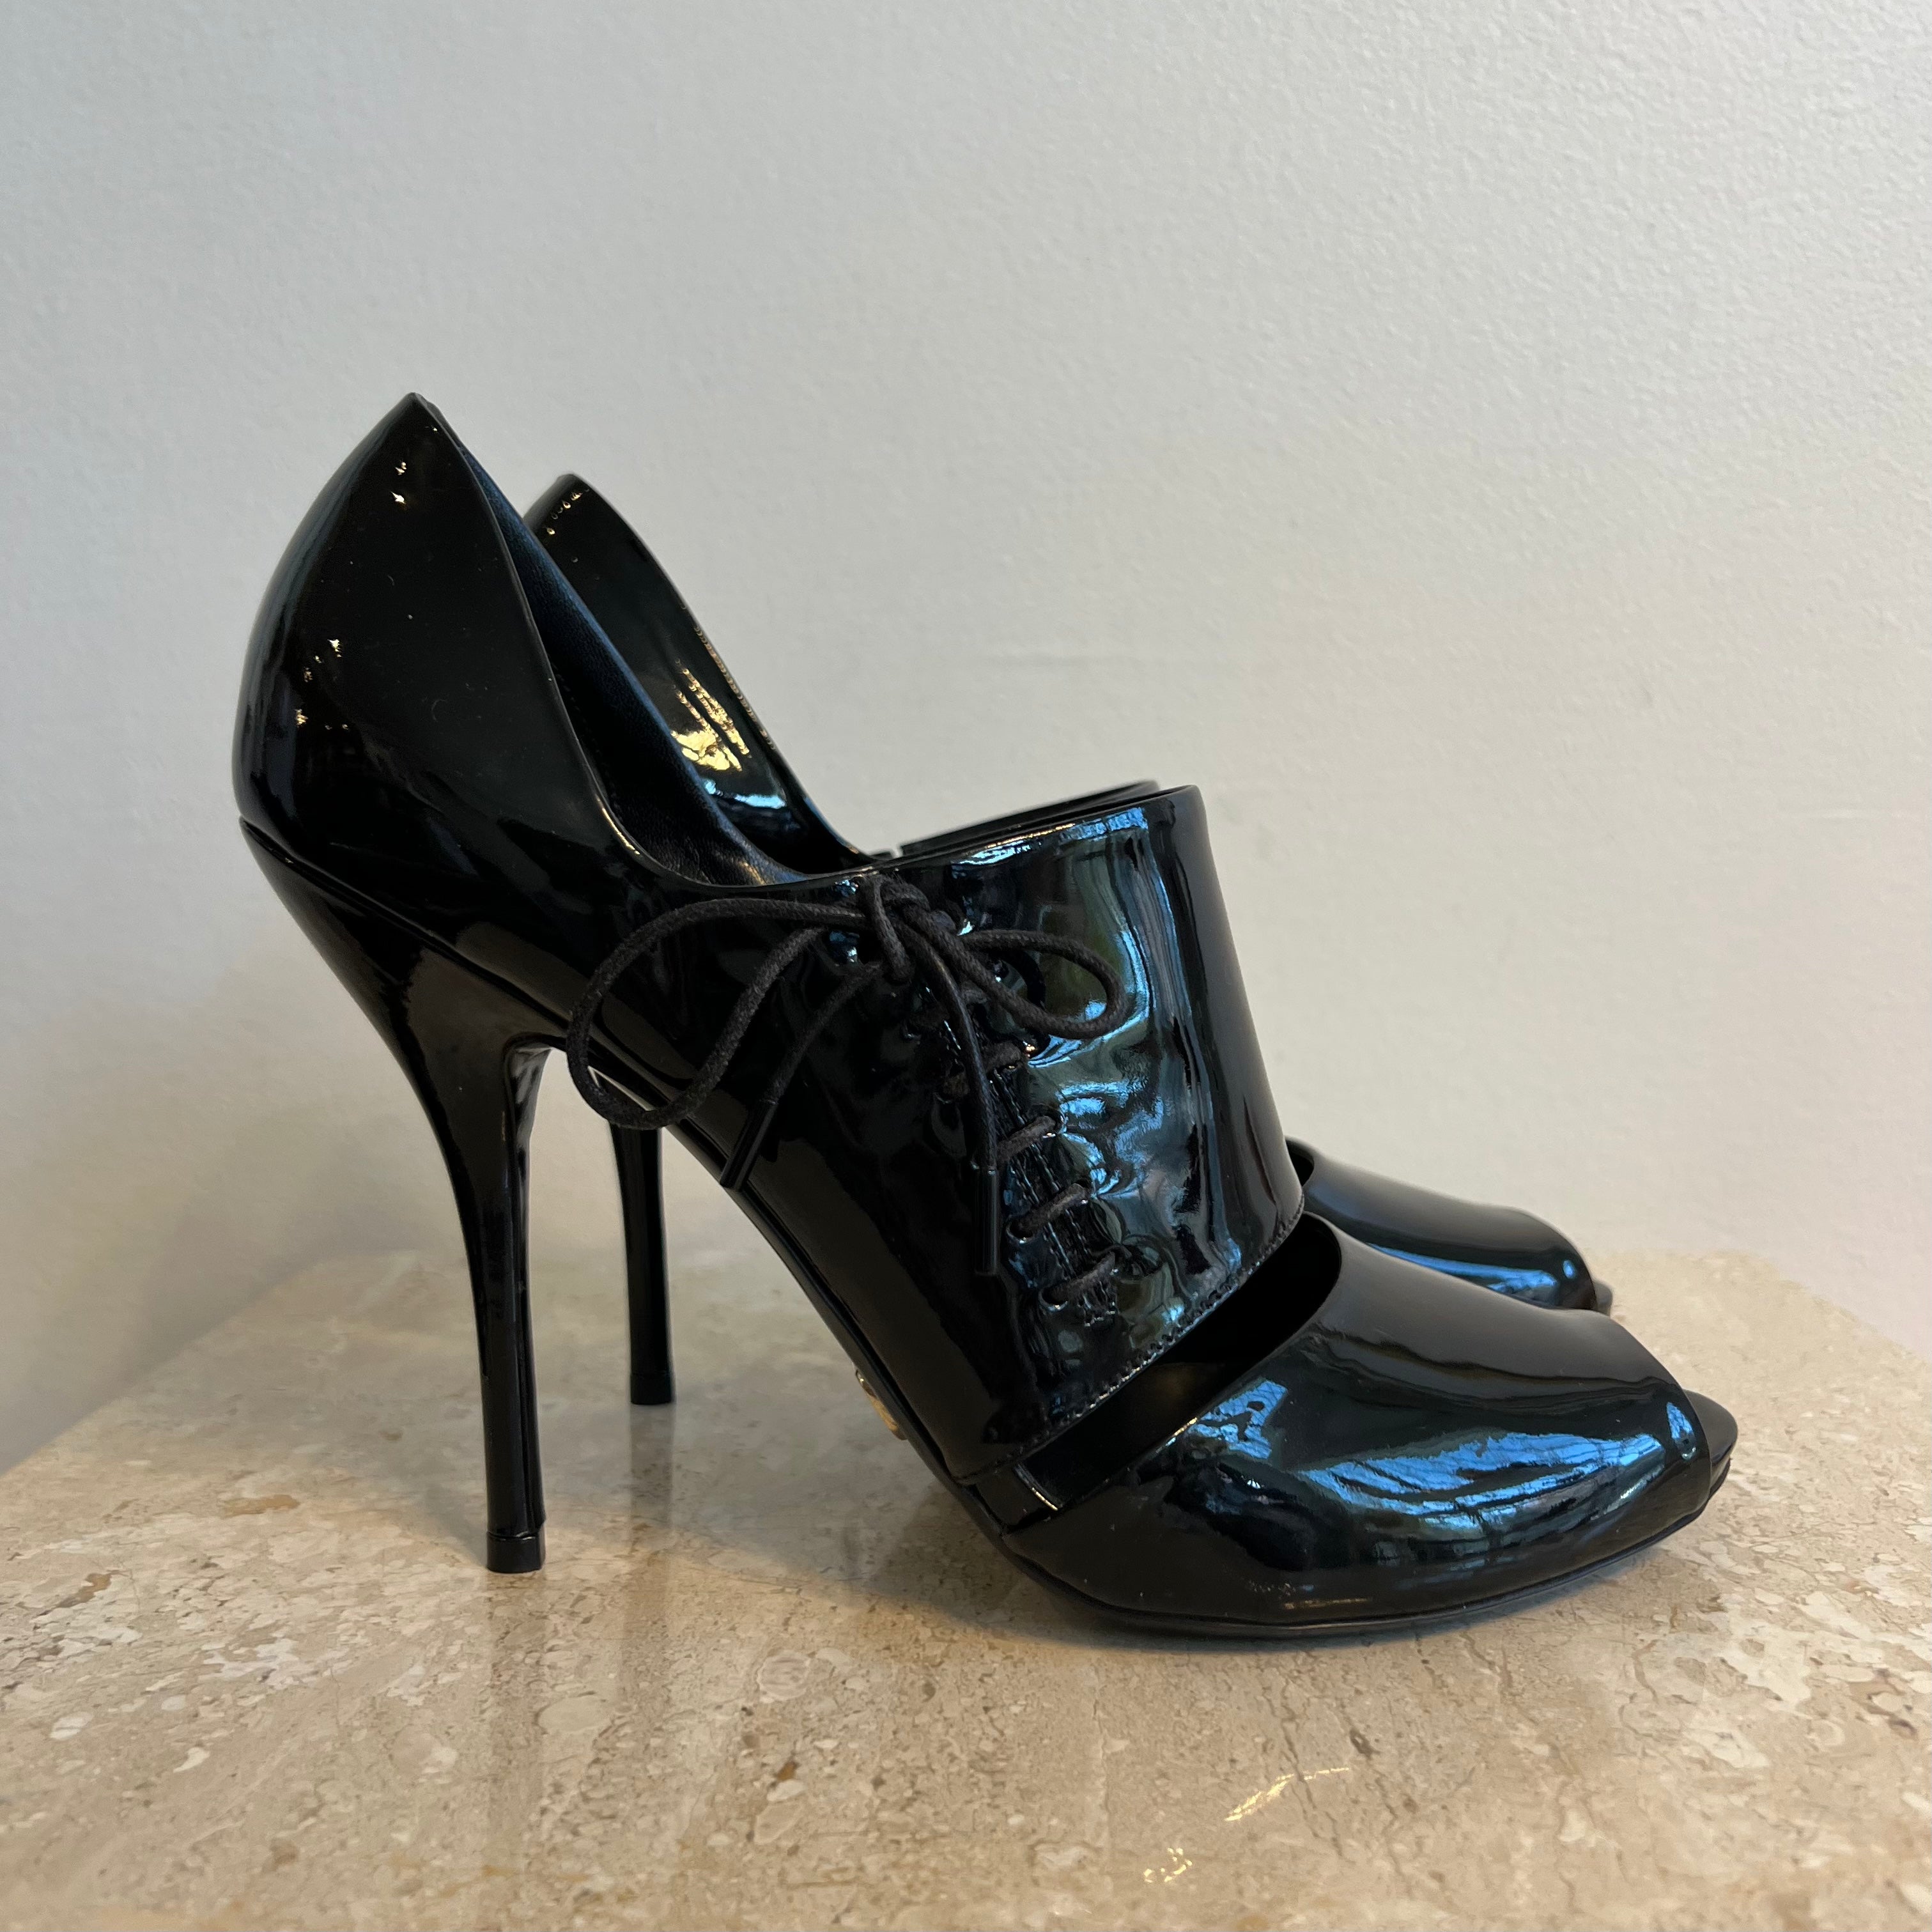 Pre-Owned GUCCI Black Patent Peep Toe Pumps - Size 10